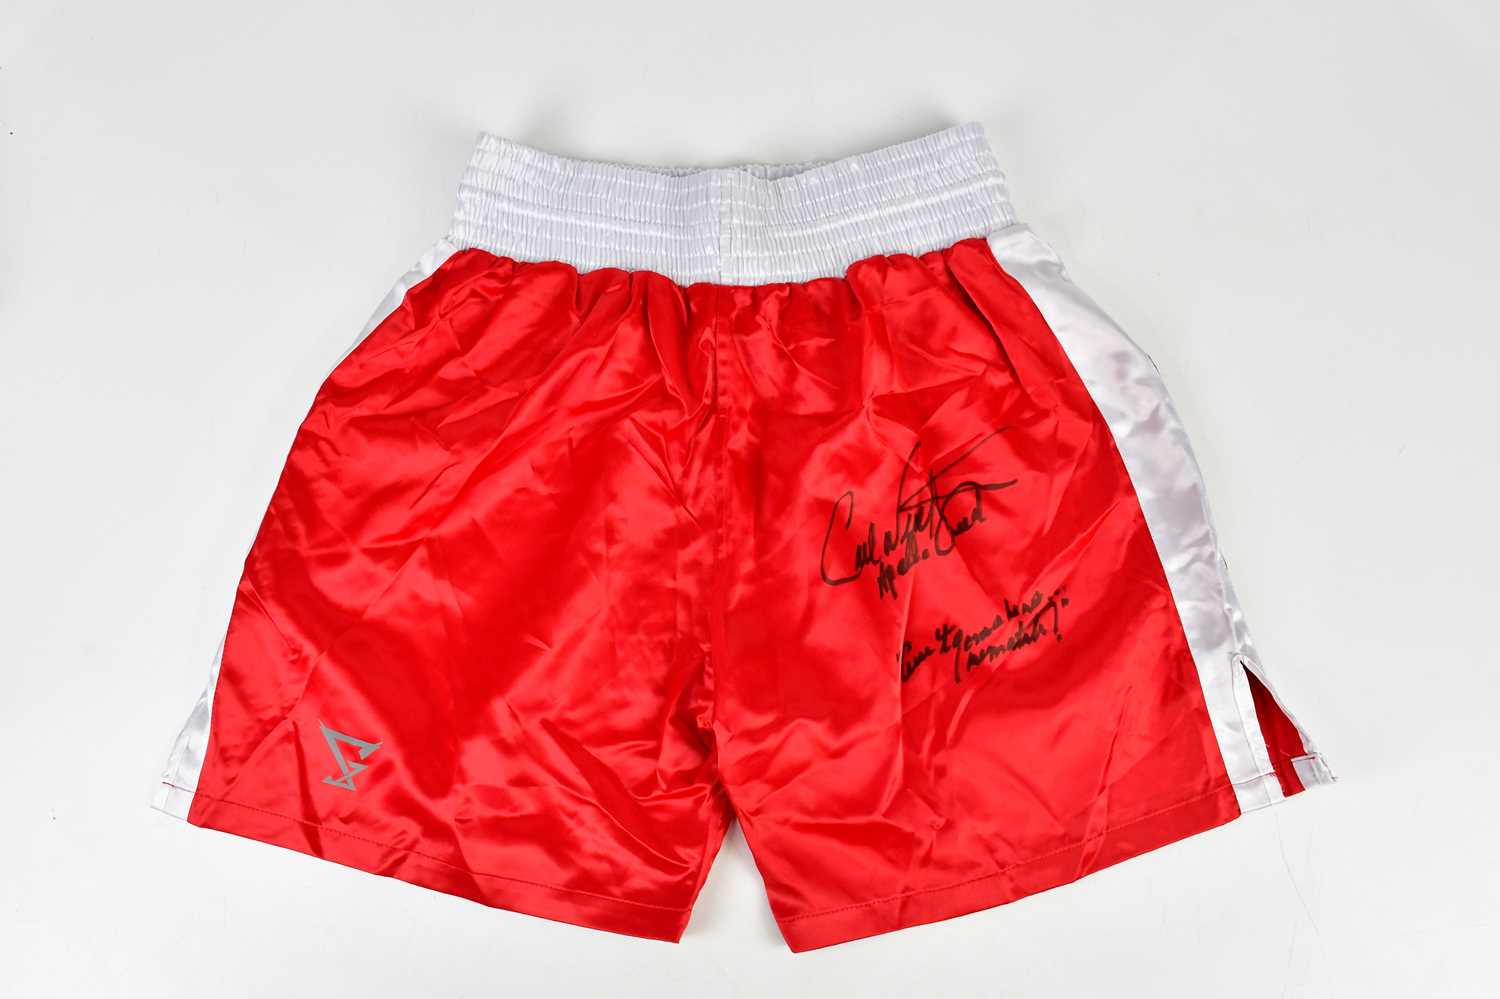 CARL WEATHERS (APOLLO CREED); a pair of red and white signed boxing shorts, inscribed 'There ain't